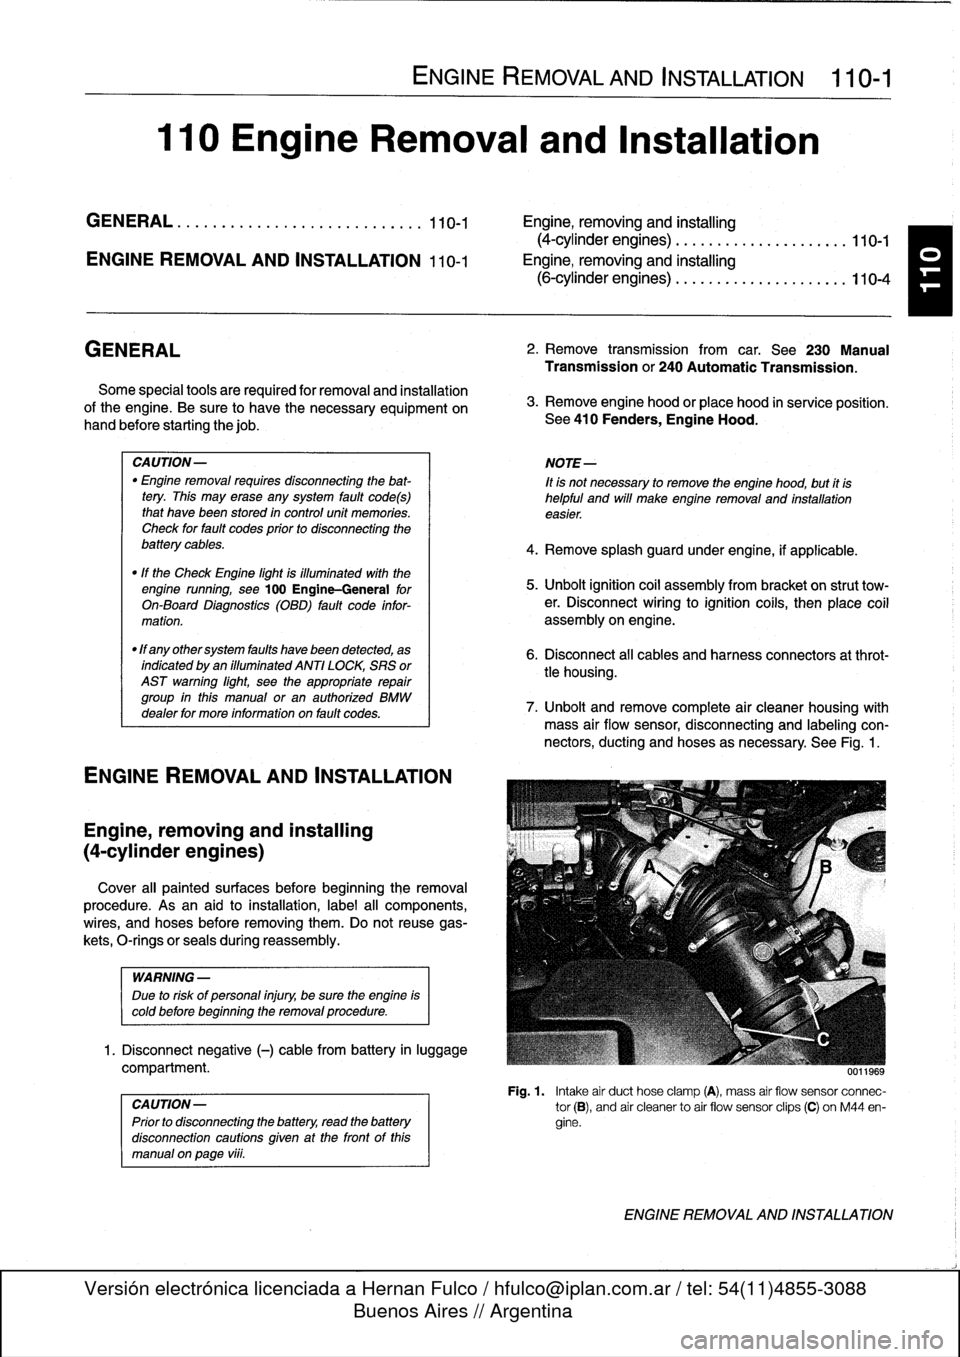 BMW 325i 1993 E36 Workshop Manual 
110
Engine
Removal
and
Installation

GENERAL
.
.
.
.
.......
.
.
.
..........
.
...
110-1

	

Engine,
removing
and
installing
(4-cylinder
engines)
.
..
.....
..
...........
110-1

ENGINE
REMOVAL
AND
